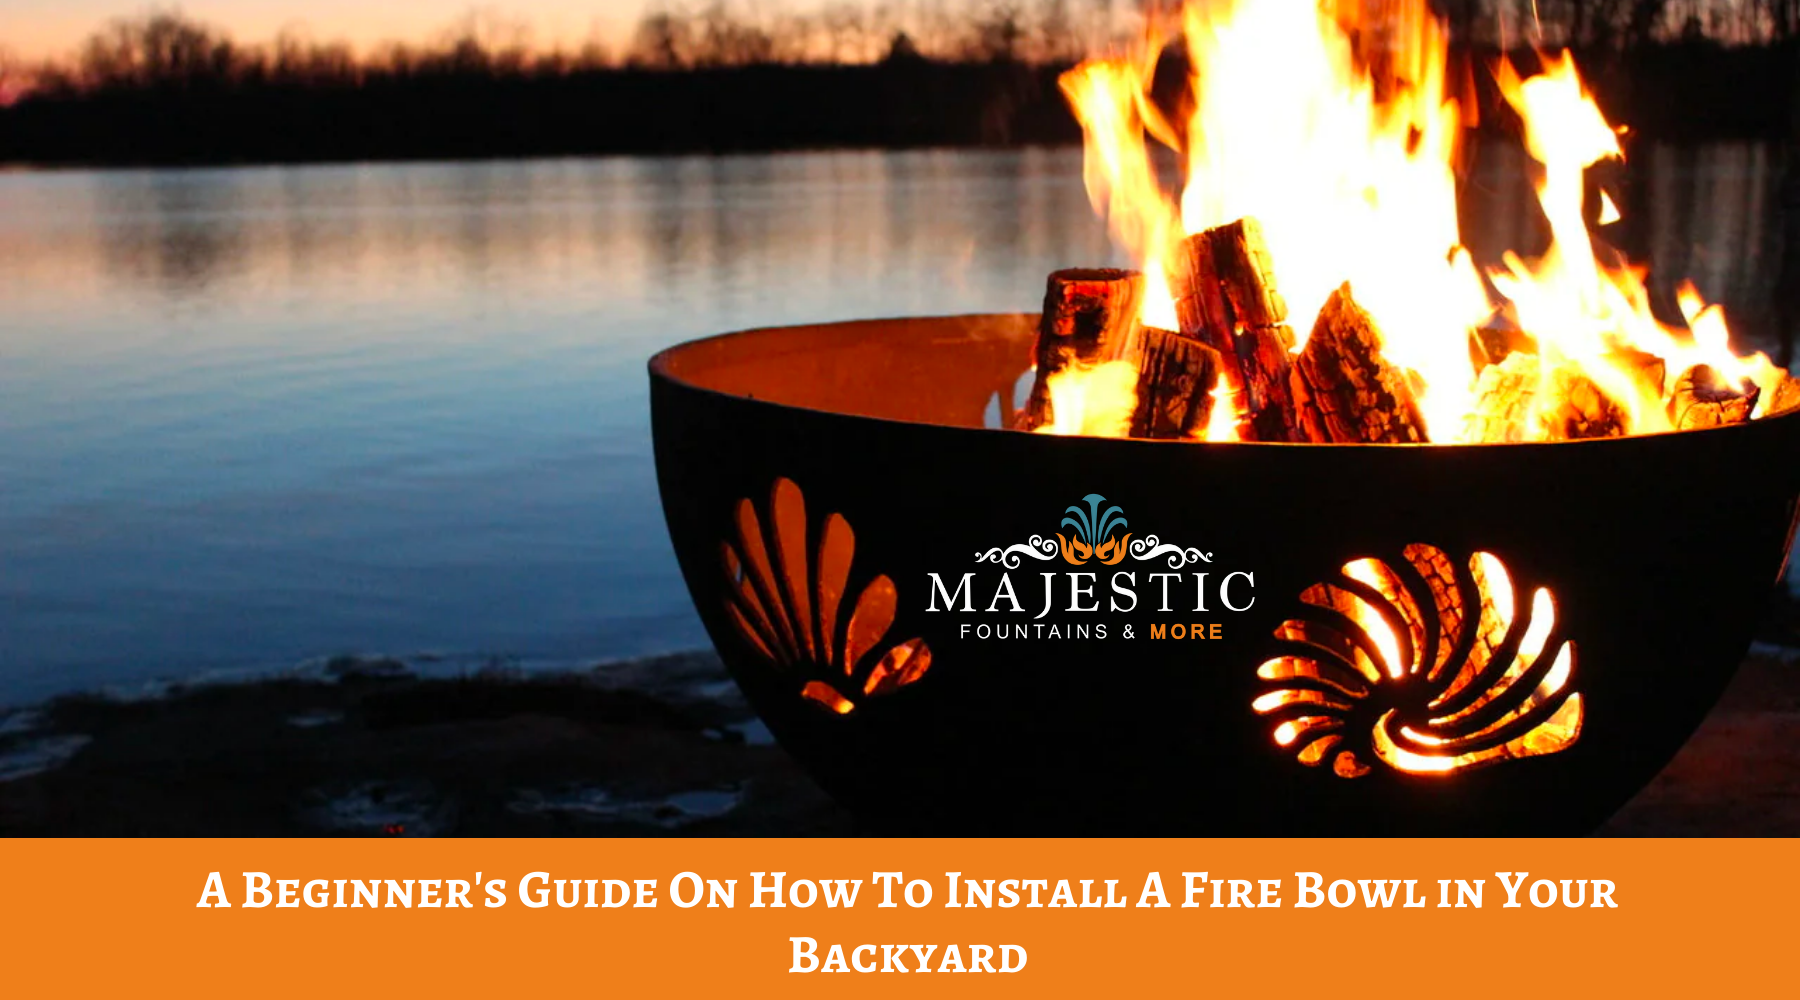 A Beginner's Guide On How To Install A Fire Bowl in Your Backyard